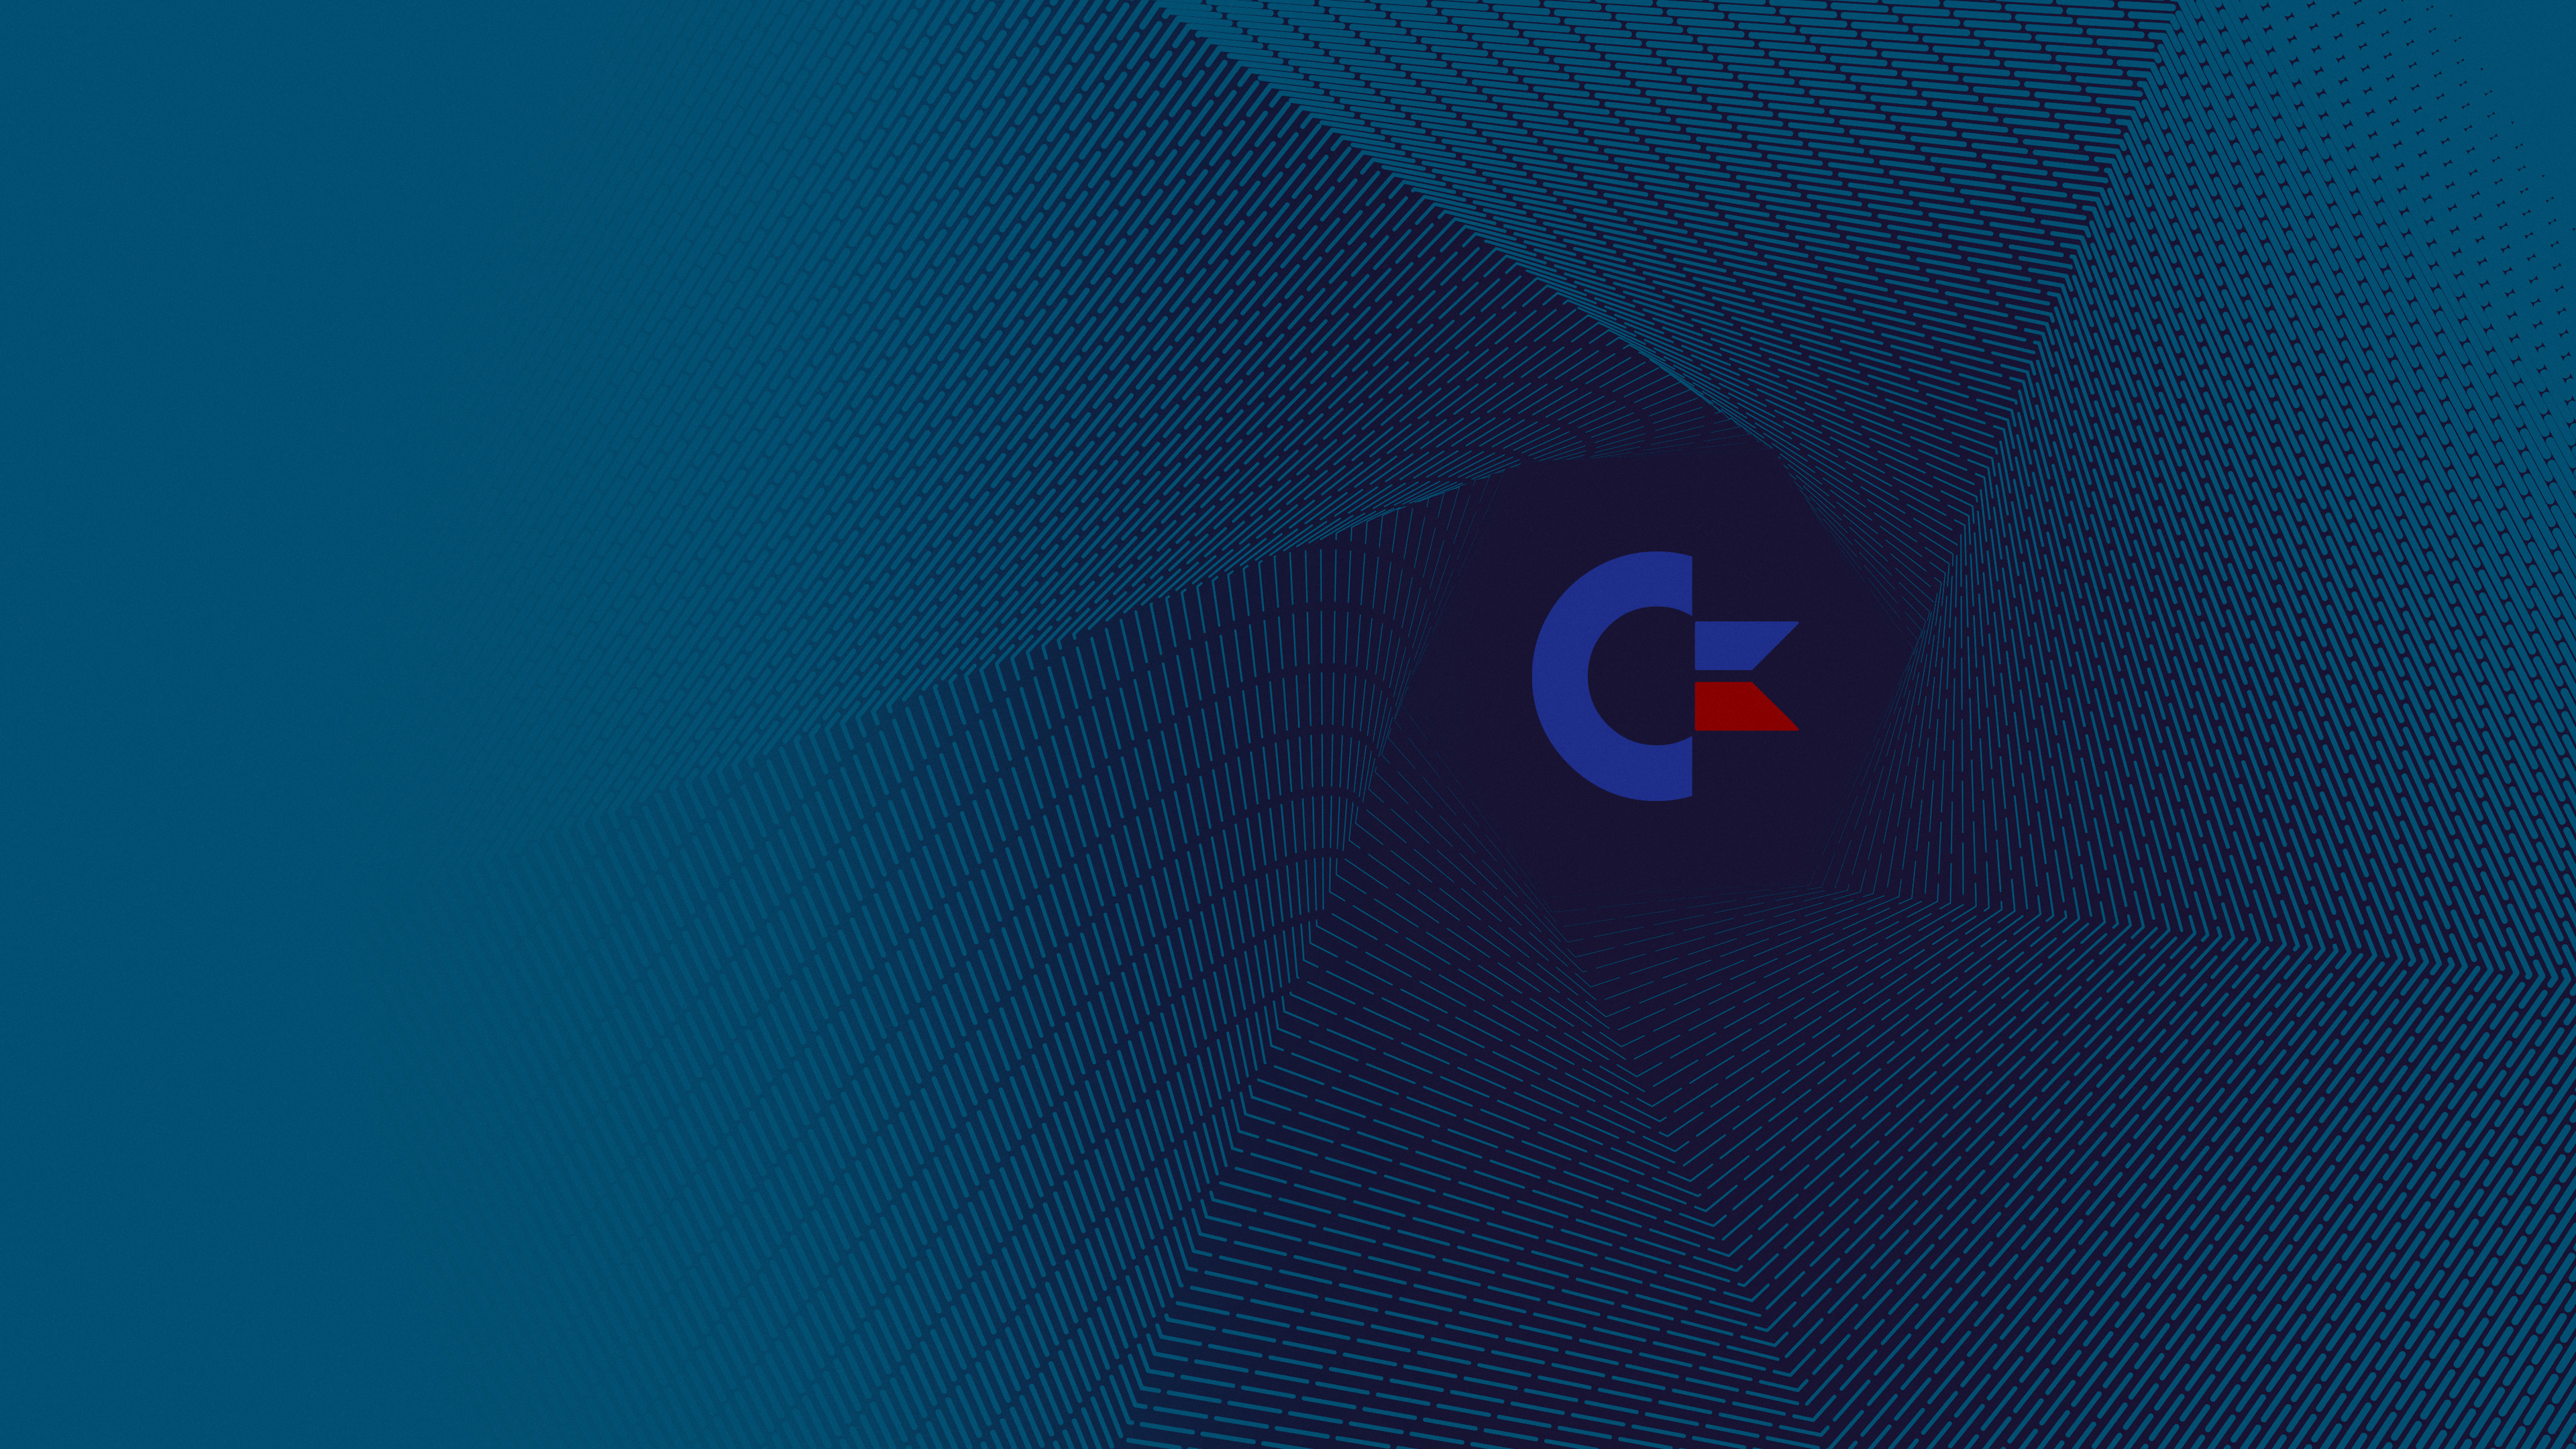 Wallpaper, Commodore logo, abstract, blue 3840x2160